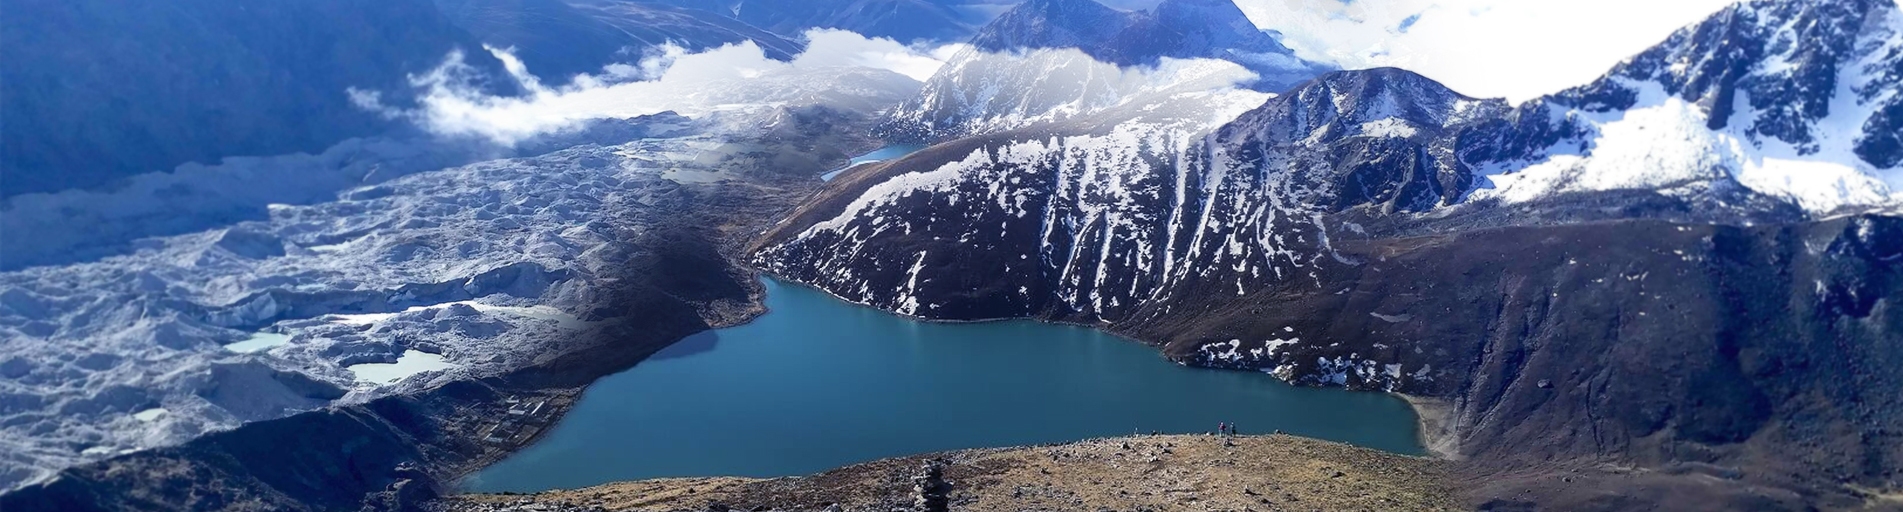 Gokyo Lakes Trek: A Comprehensive Guide to Nepal's Stunning High-Altitude Lakes